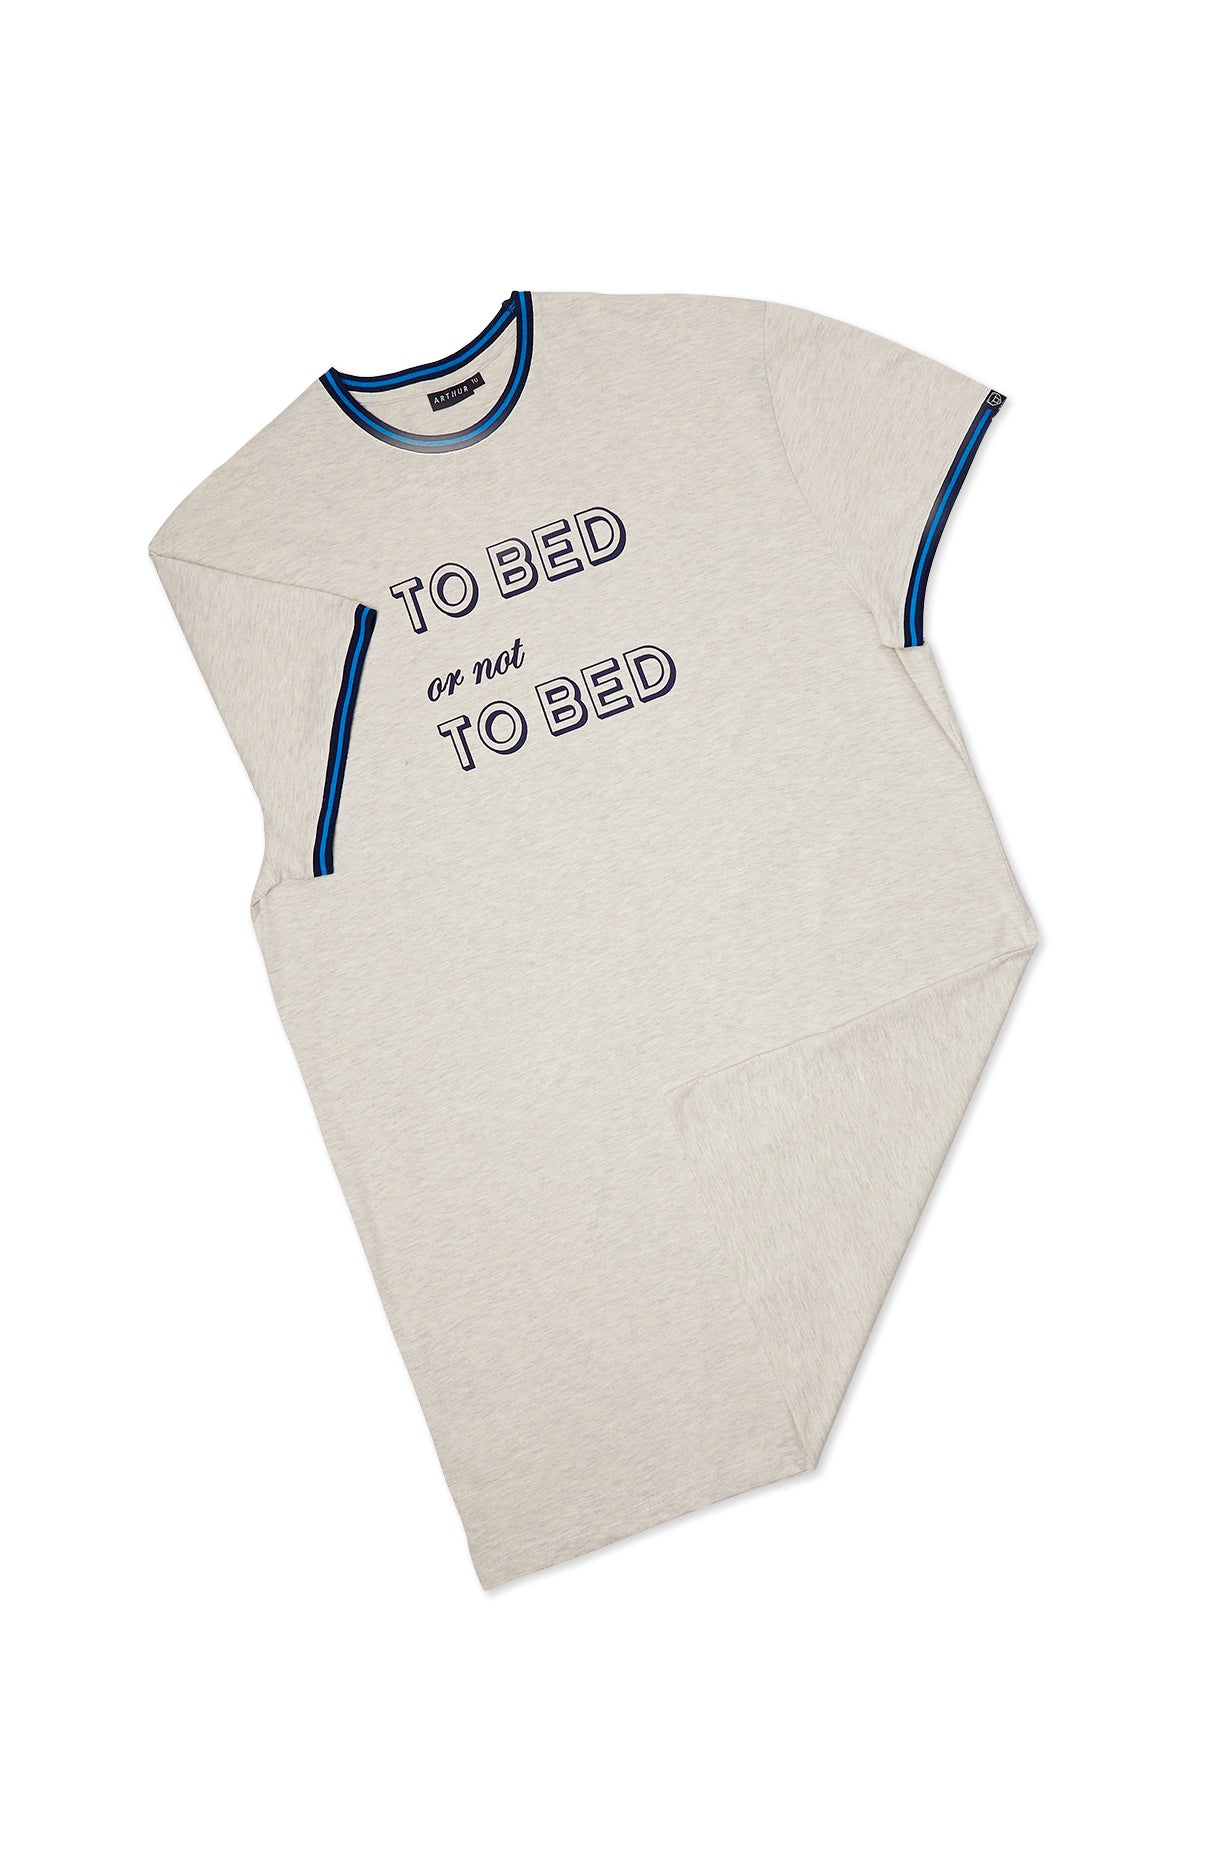 Maxi Tee Shirt Bed or not to Bed 3